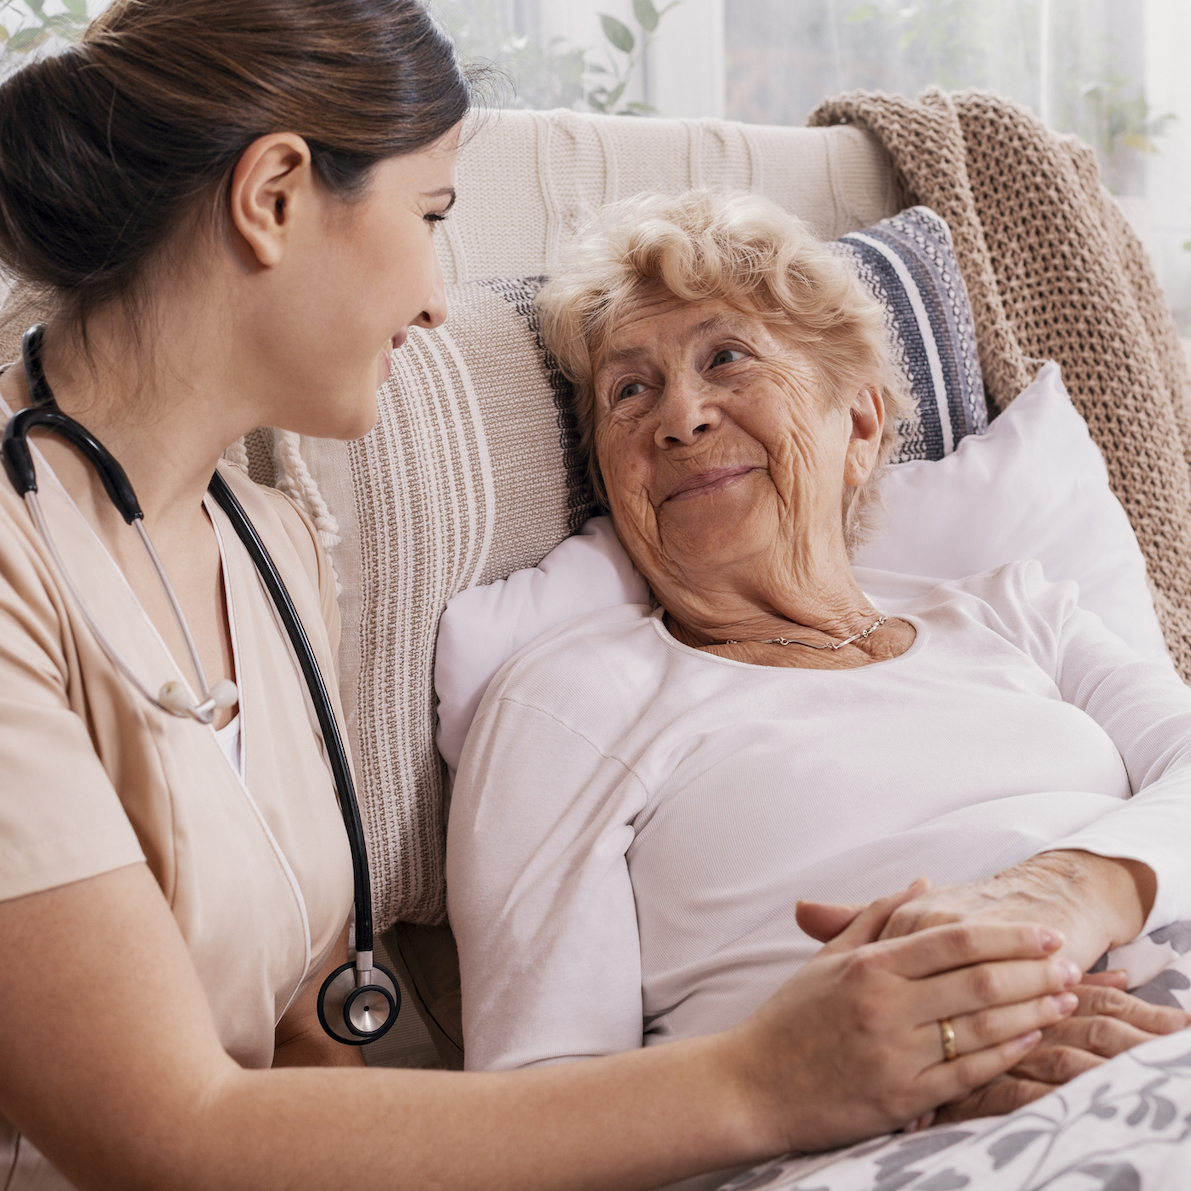 Senior woman lying in bed with nurse